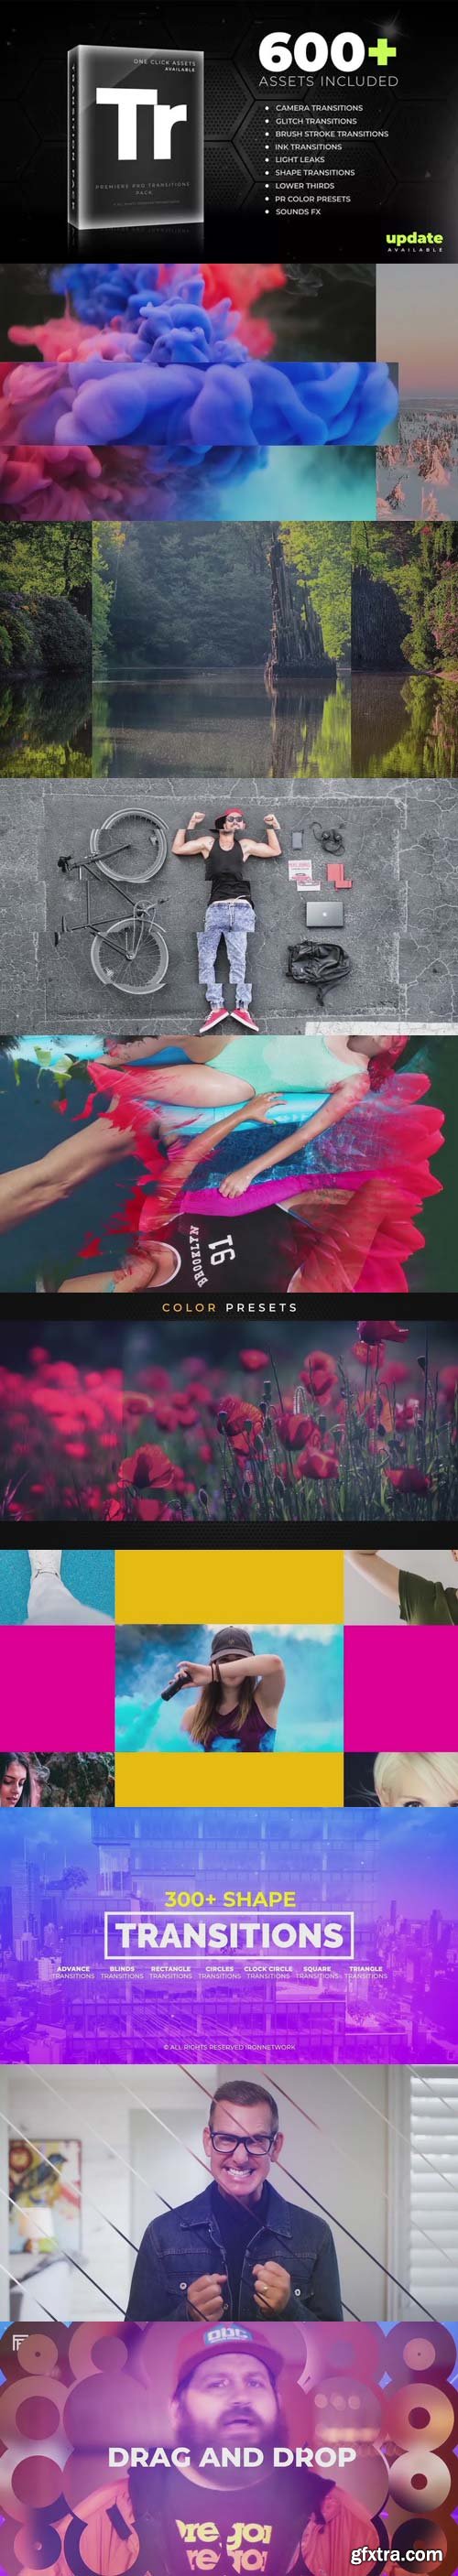 Videohive - 600+ Pack: Transitions, Light Leaks, Color Presets, Sound FX (Update 15 May 18) - 21935448